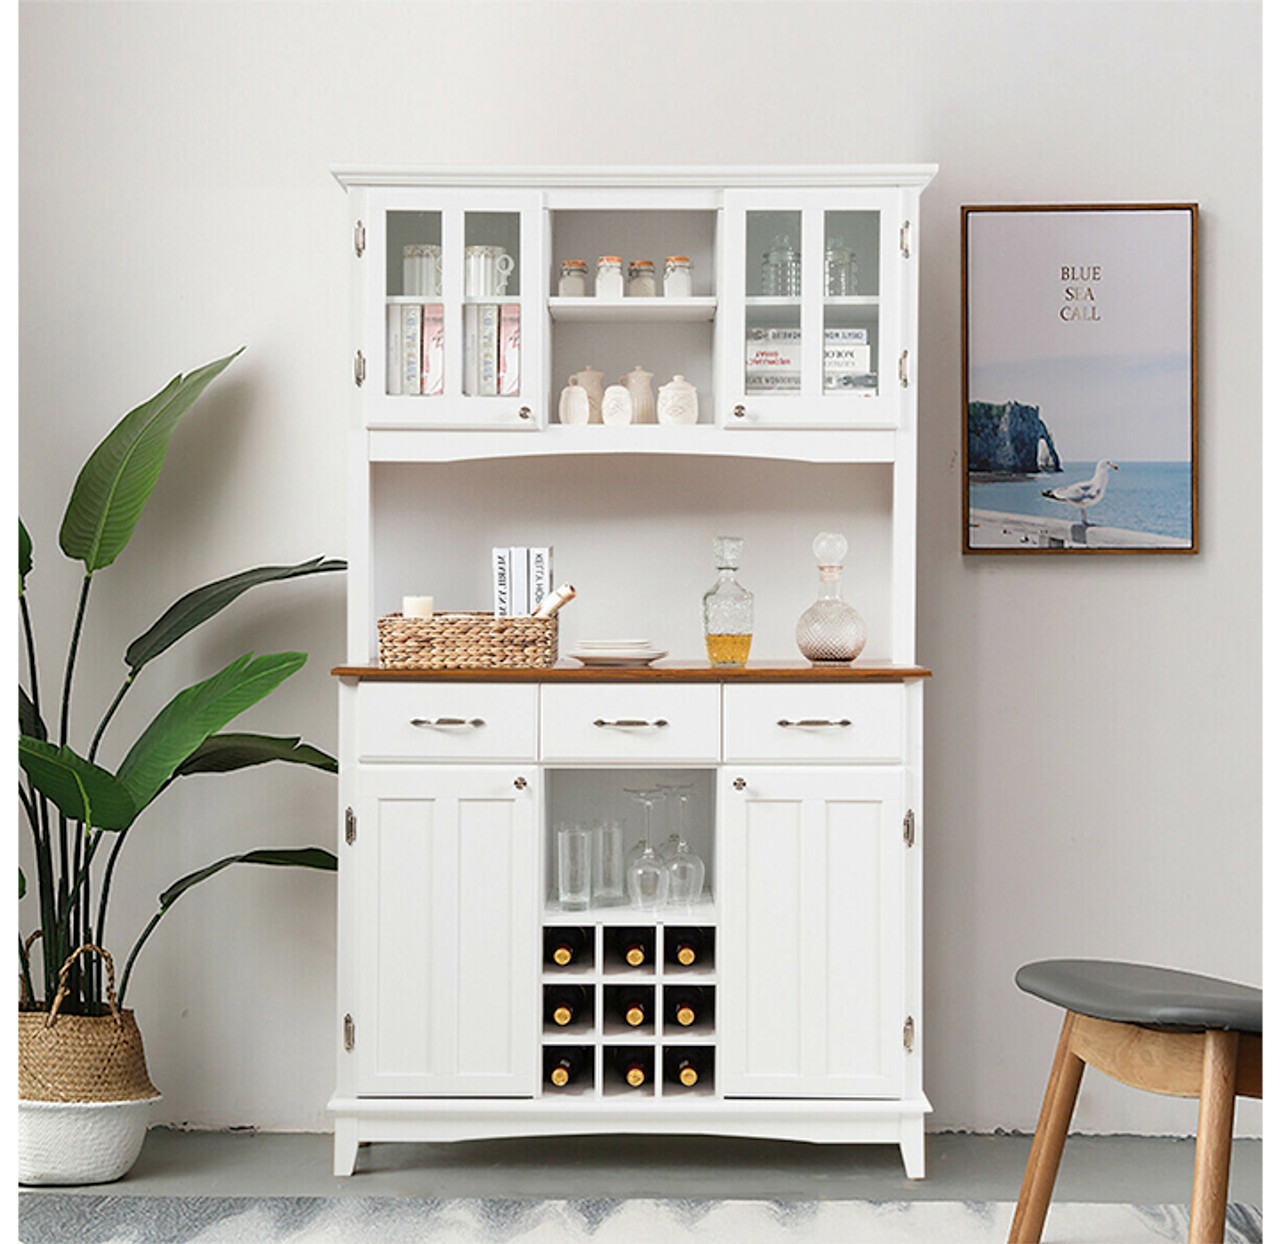 White Buffet and Hutch Kitchen Storage Cabinet product image